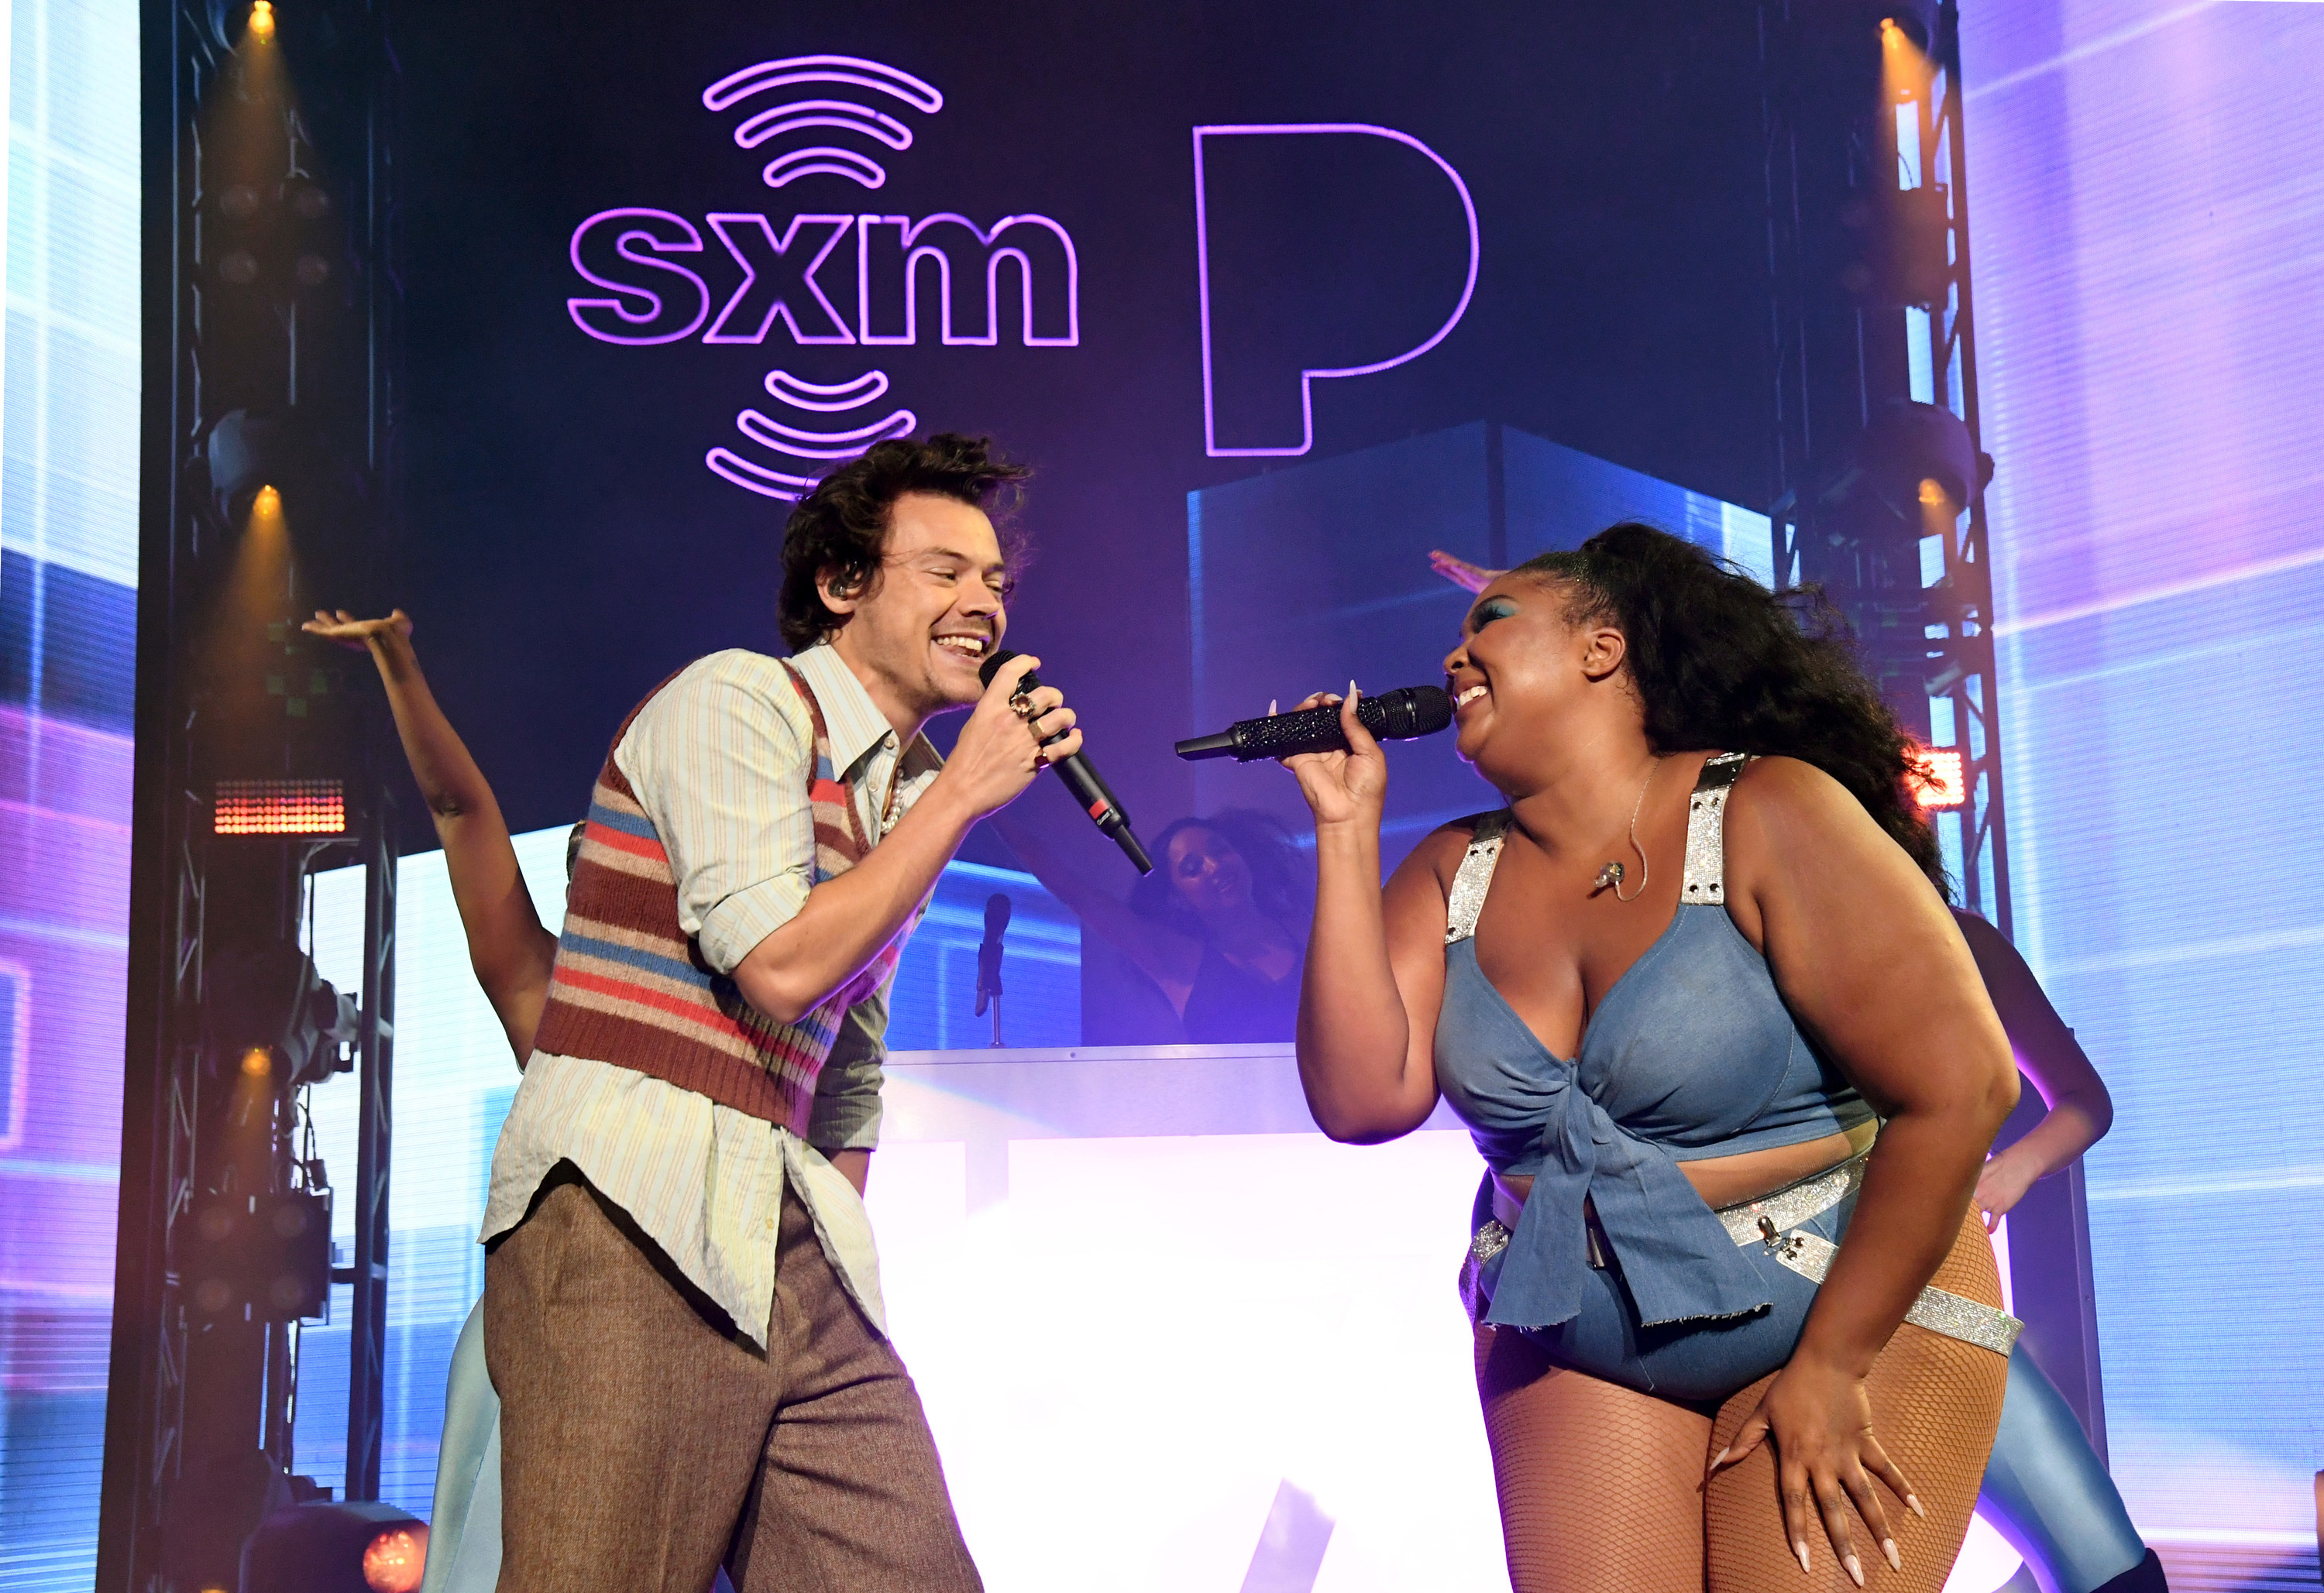 Harry Styles and Lizzo performing together on stage